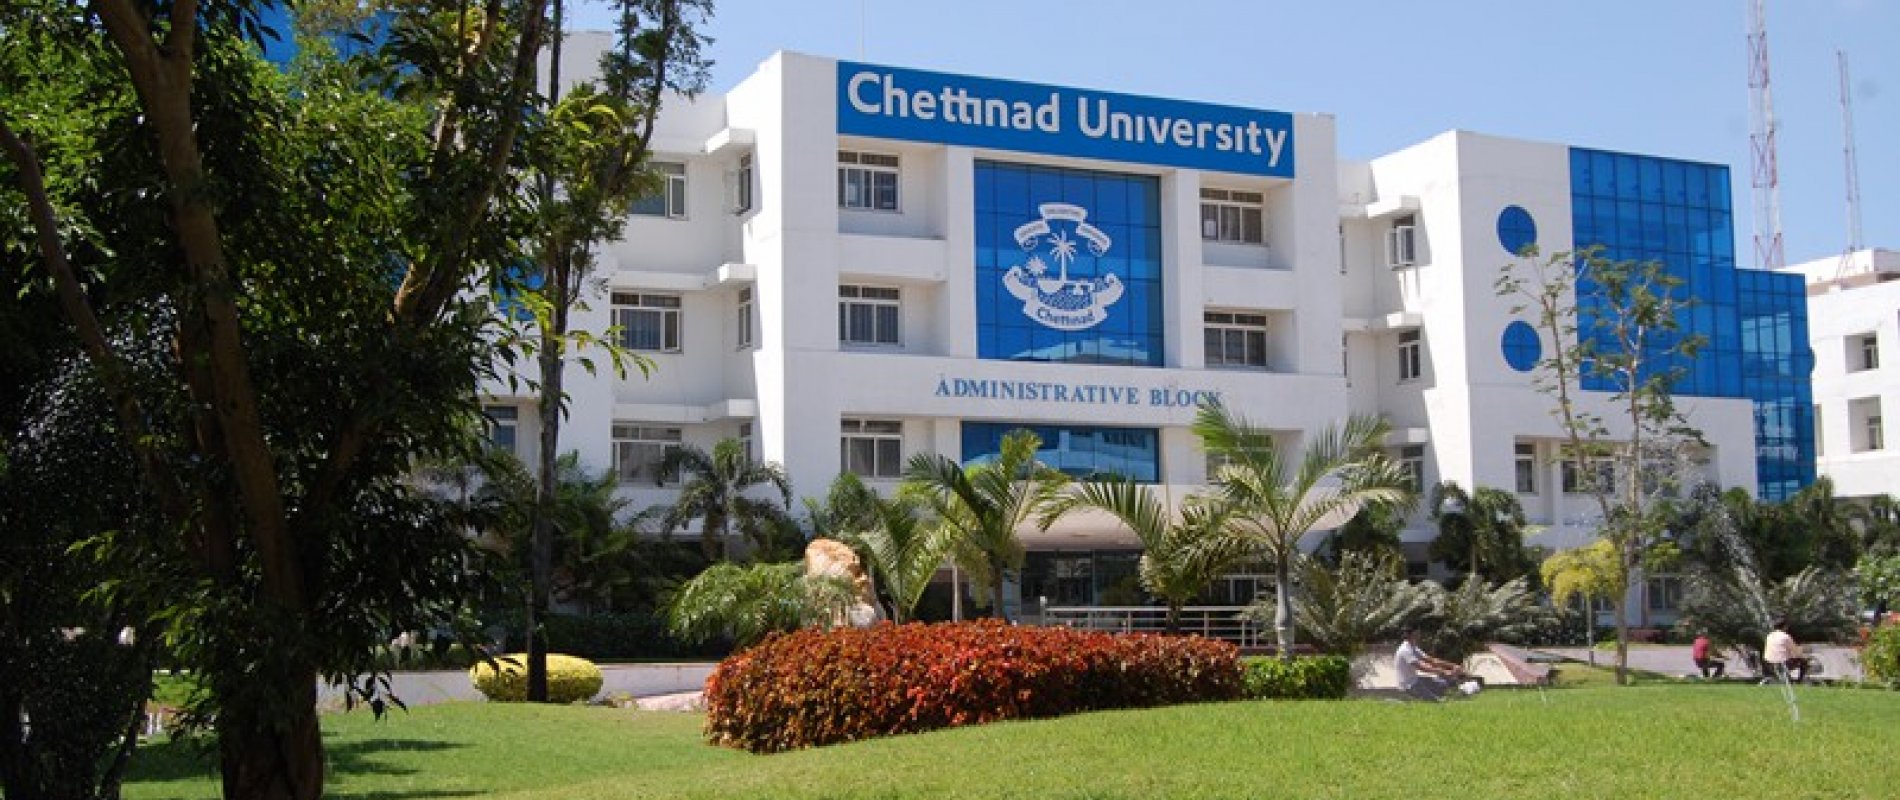 Chettinad Academy of Research and Education (CARE) Fee Structure